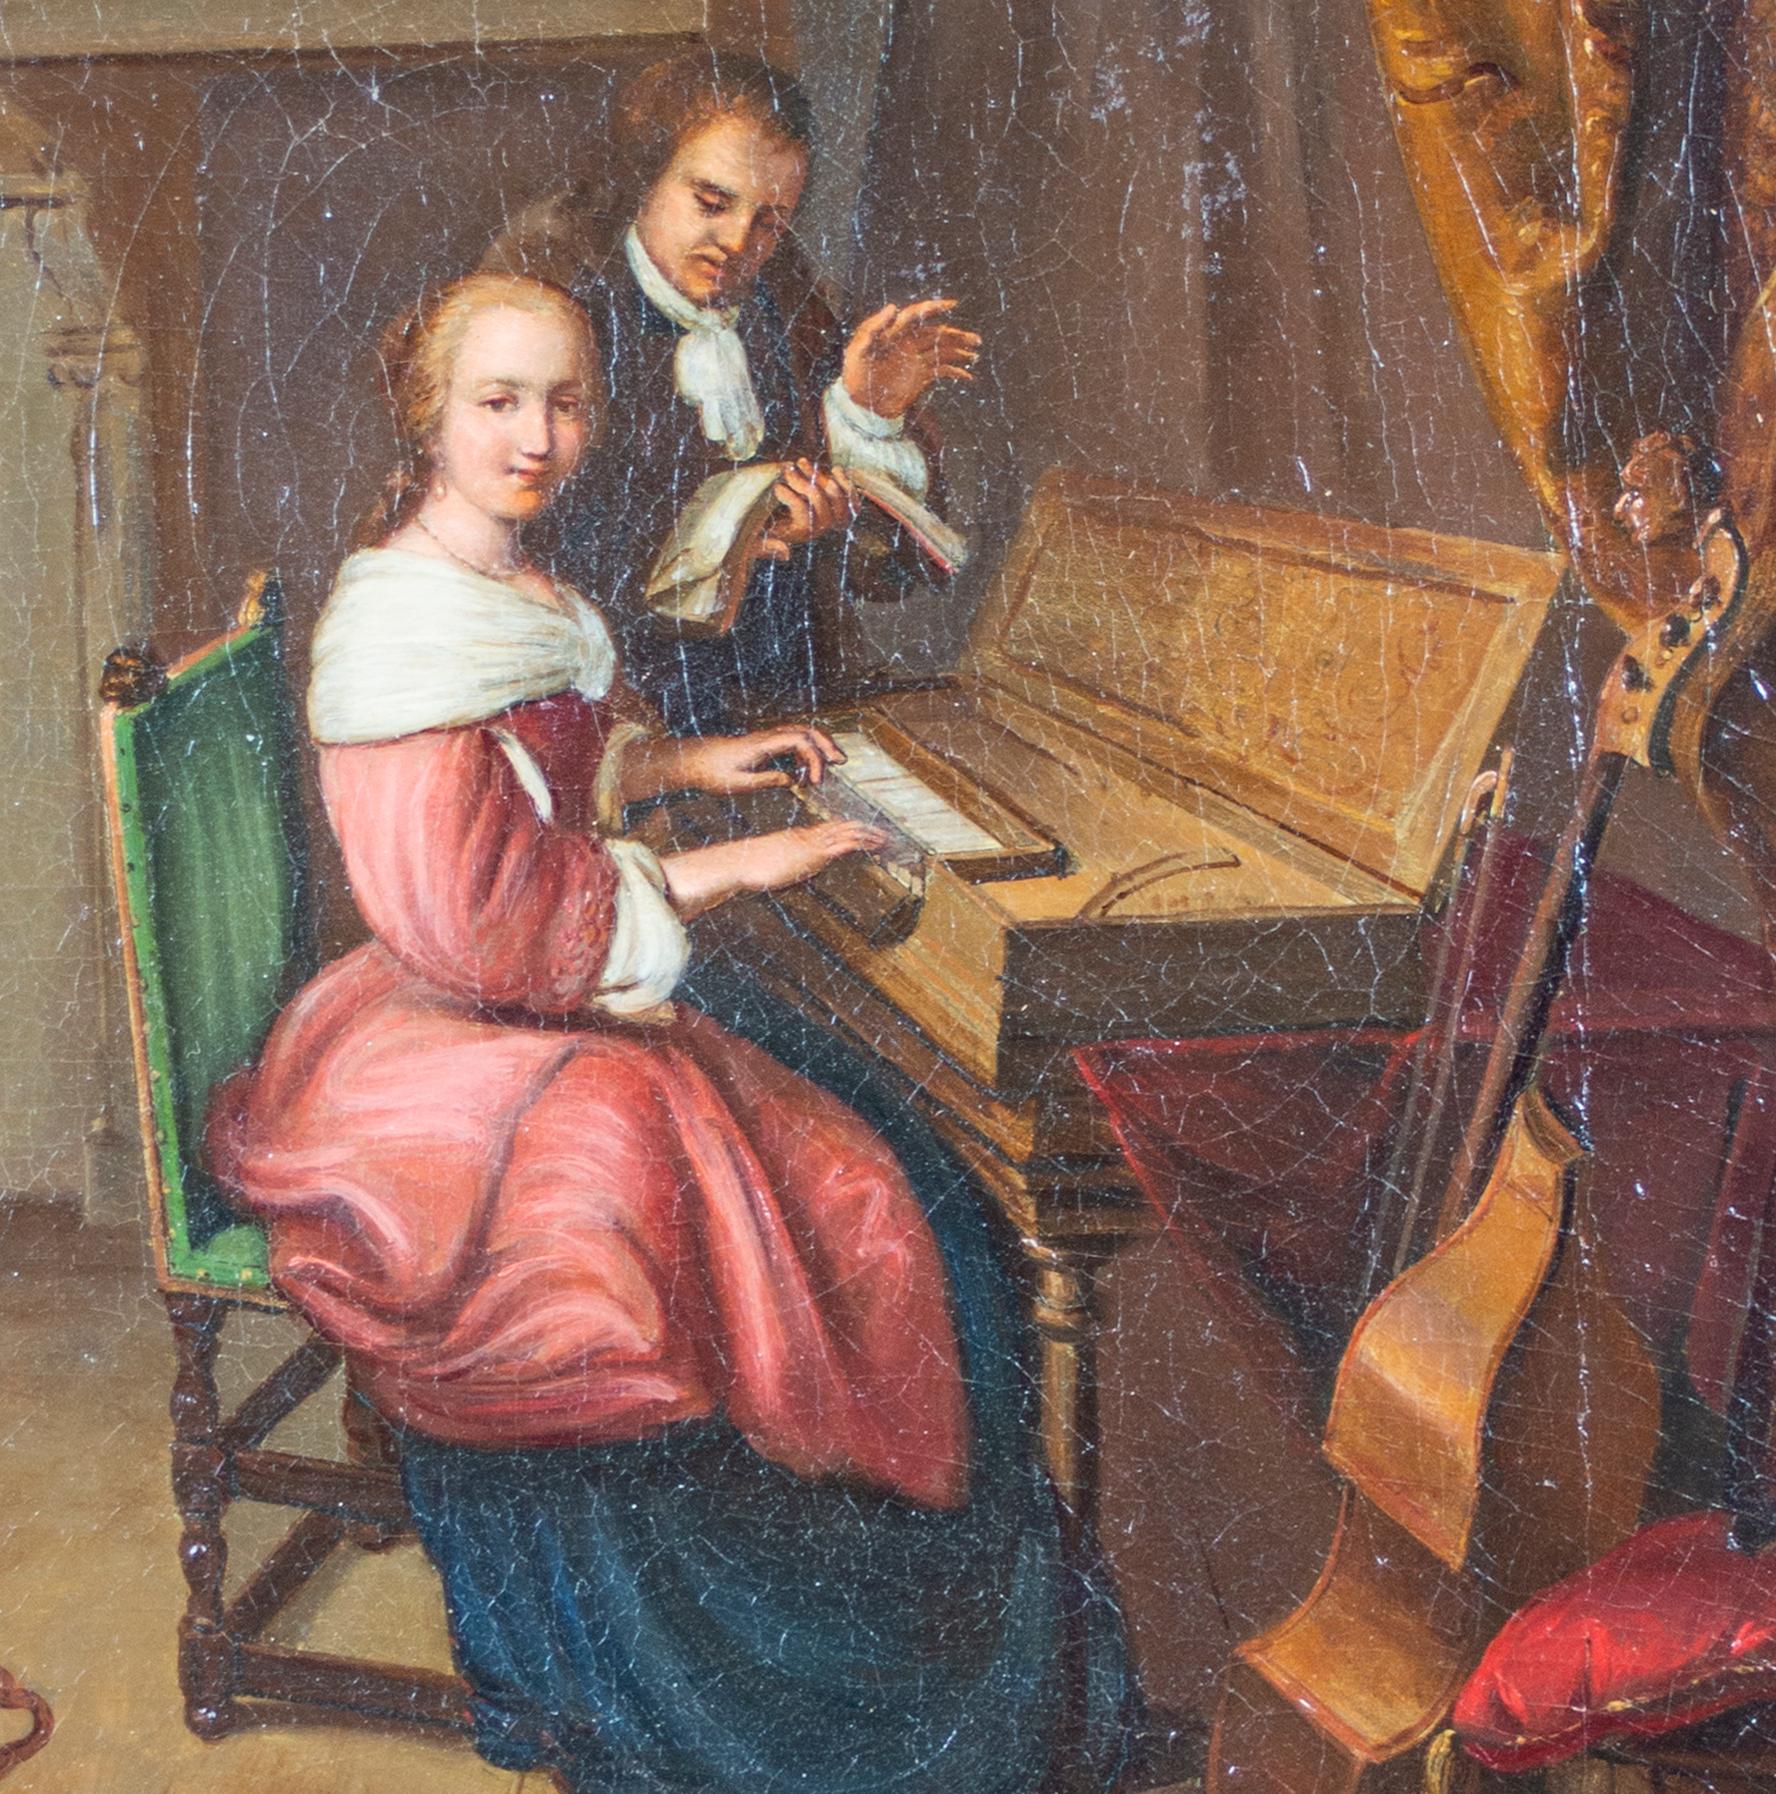 'The Music Lesson' original oil painting after Dou with clavichord and viol - Baroque Painting by Gerrit Dou (After)